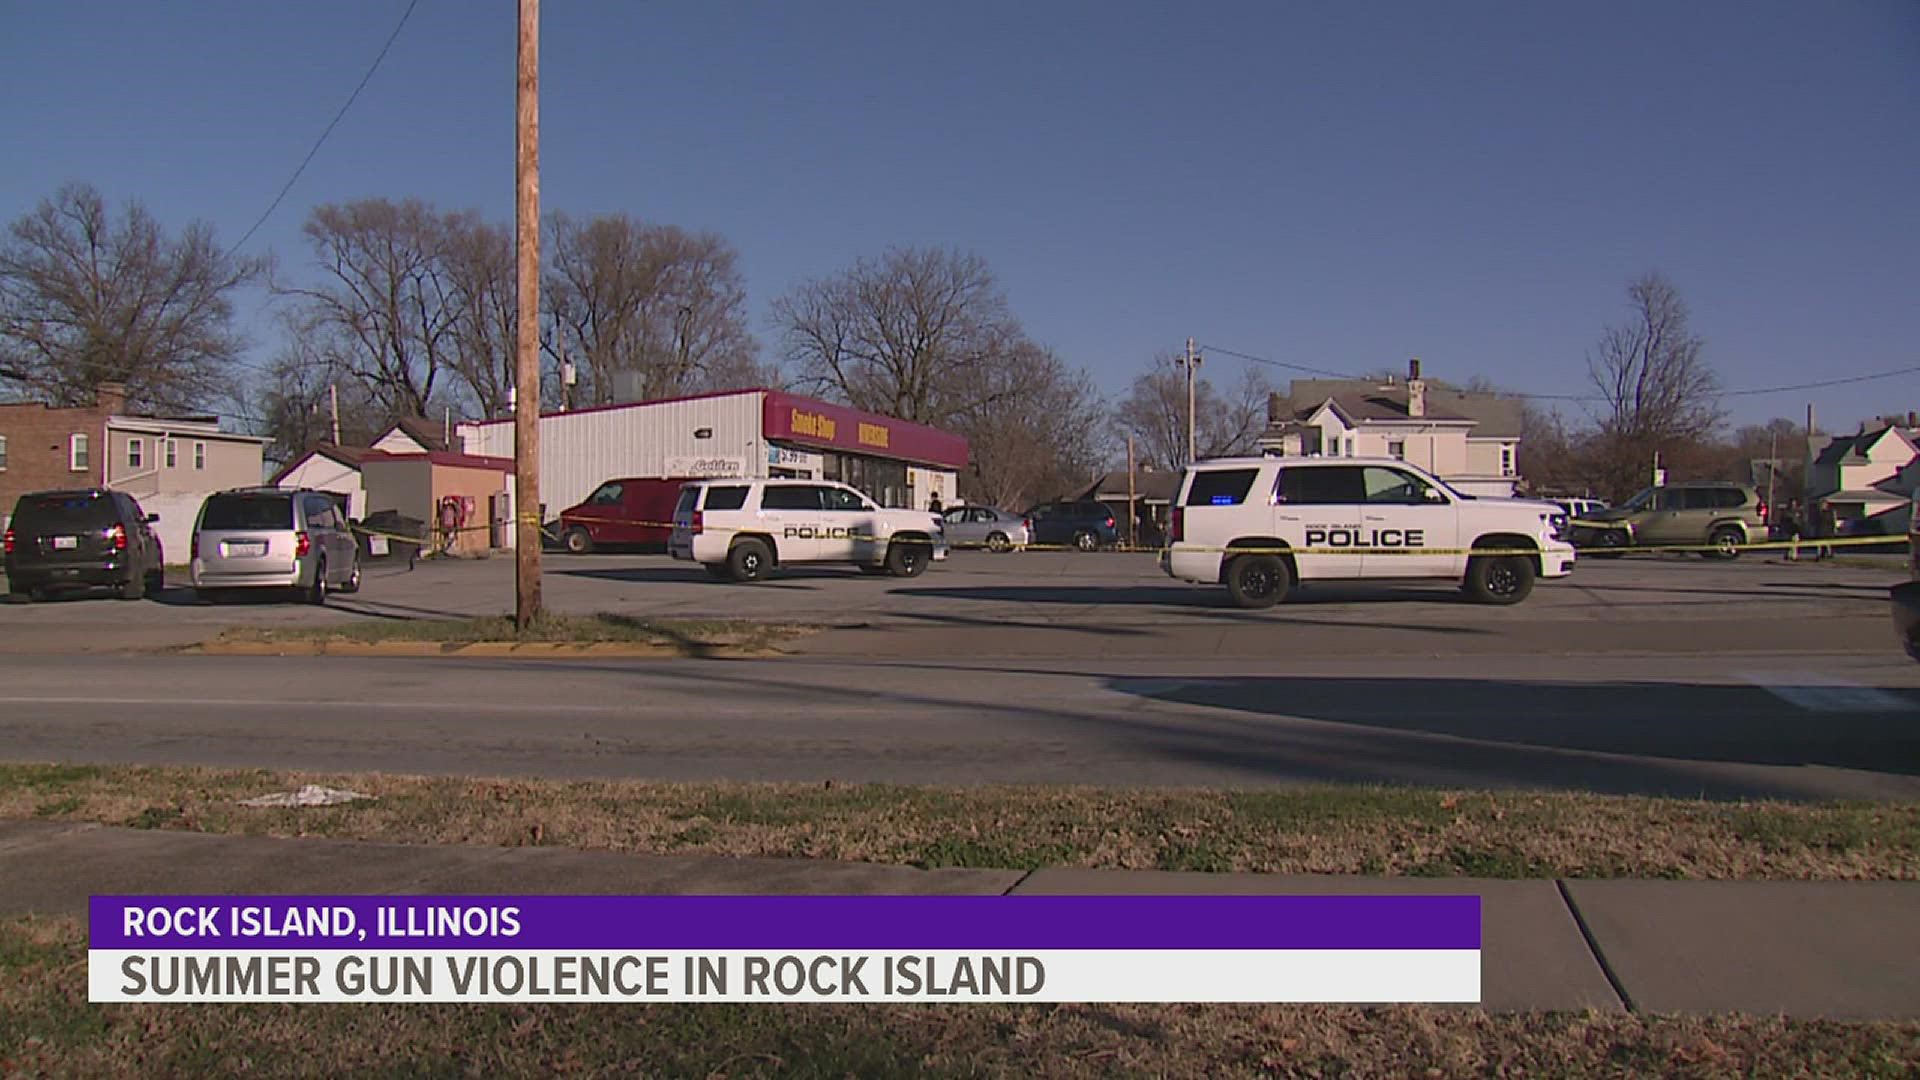 Since the start of the summer, the Rock Island Police Department has reported a total of ten shootings, half of which were fatal.